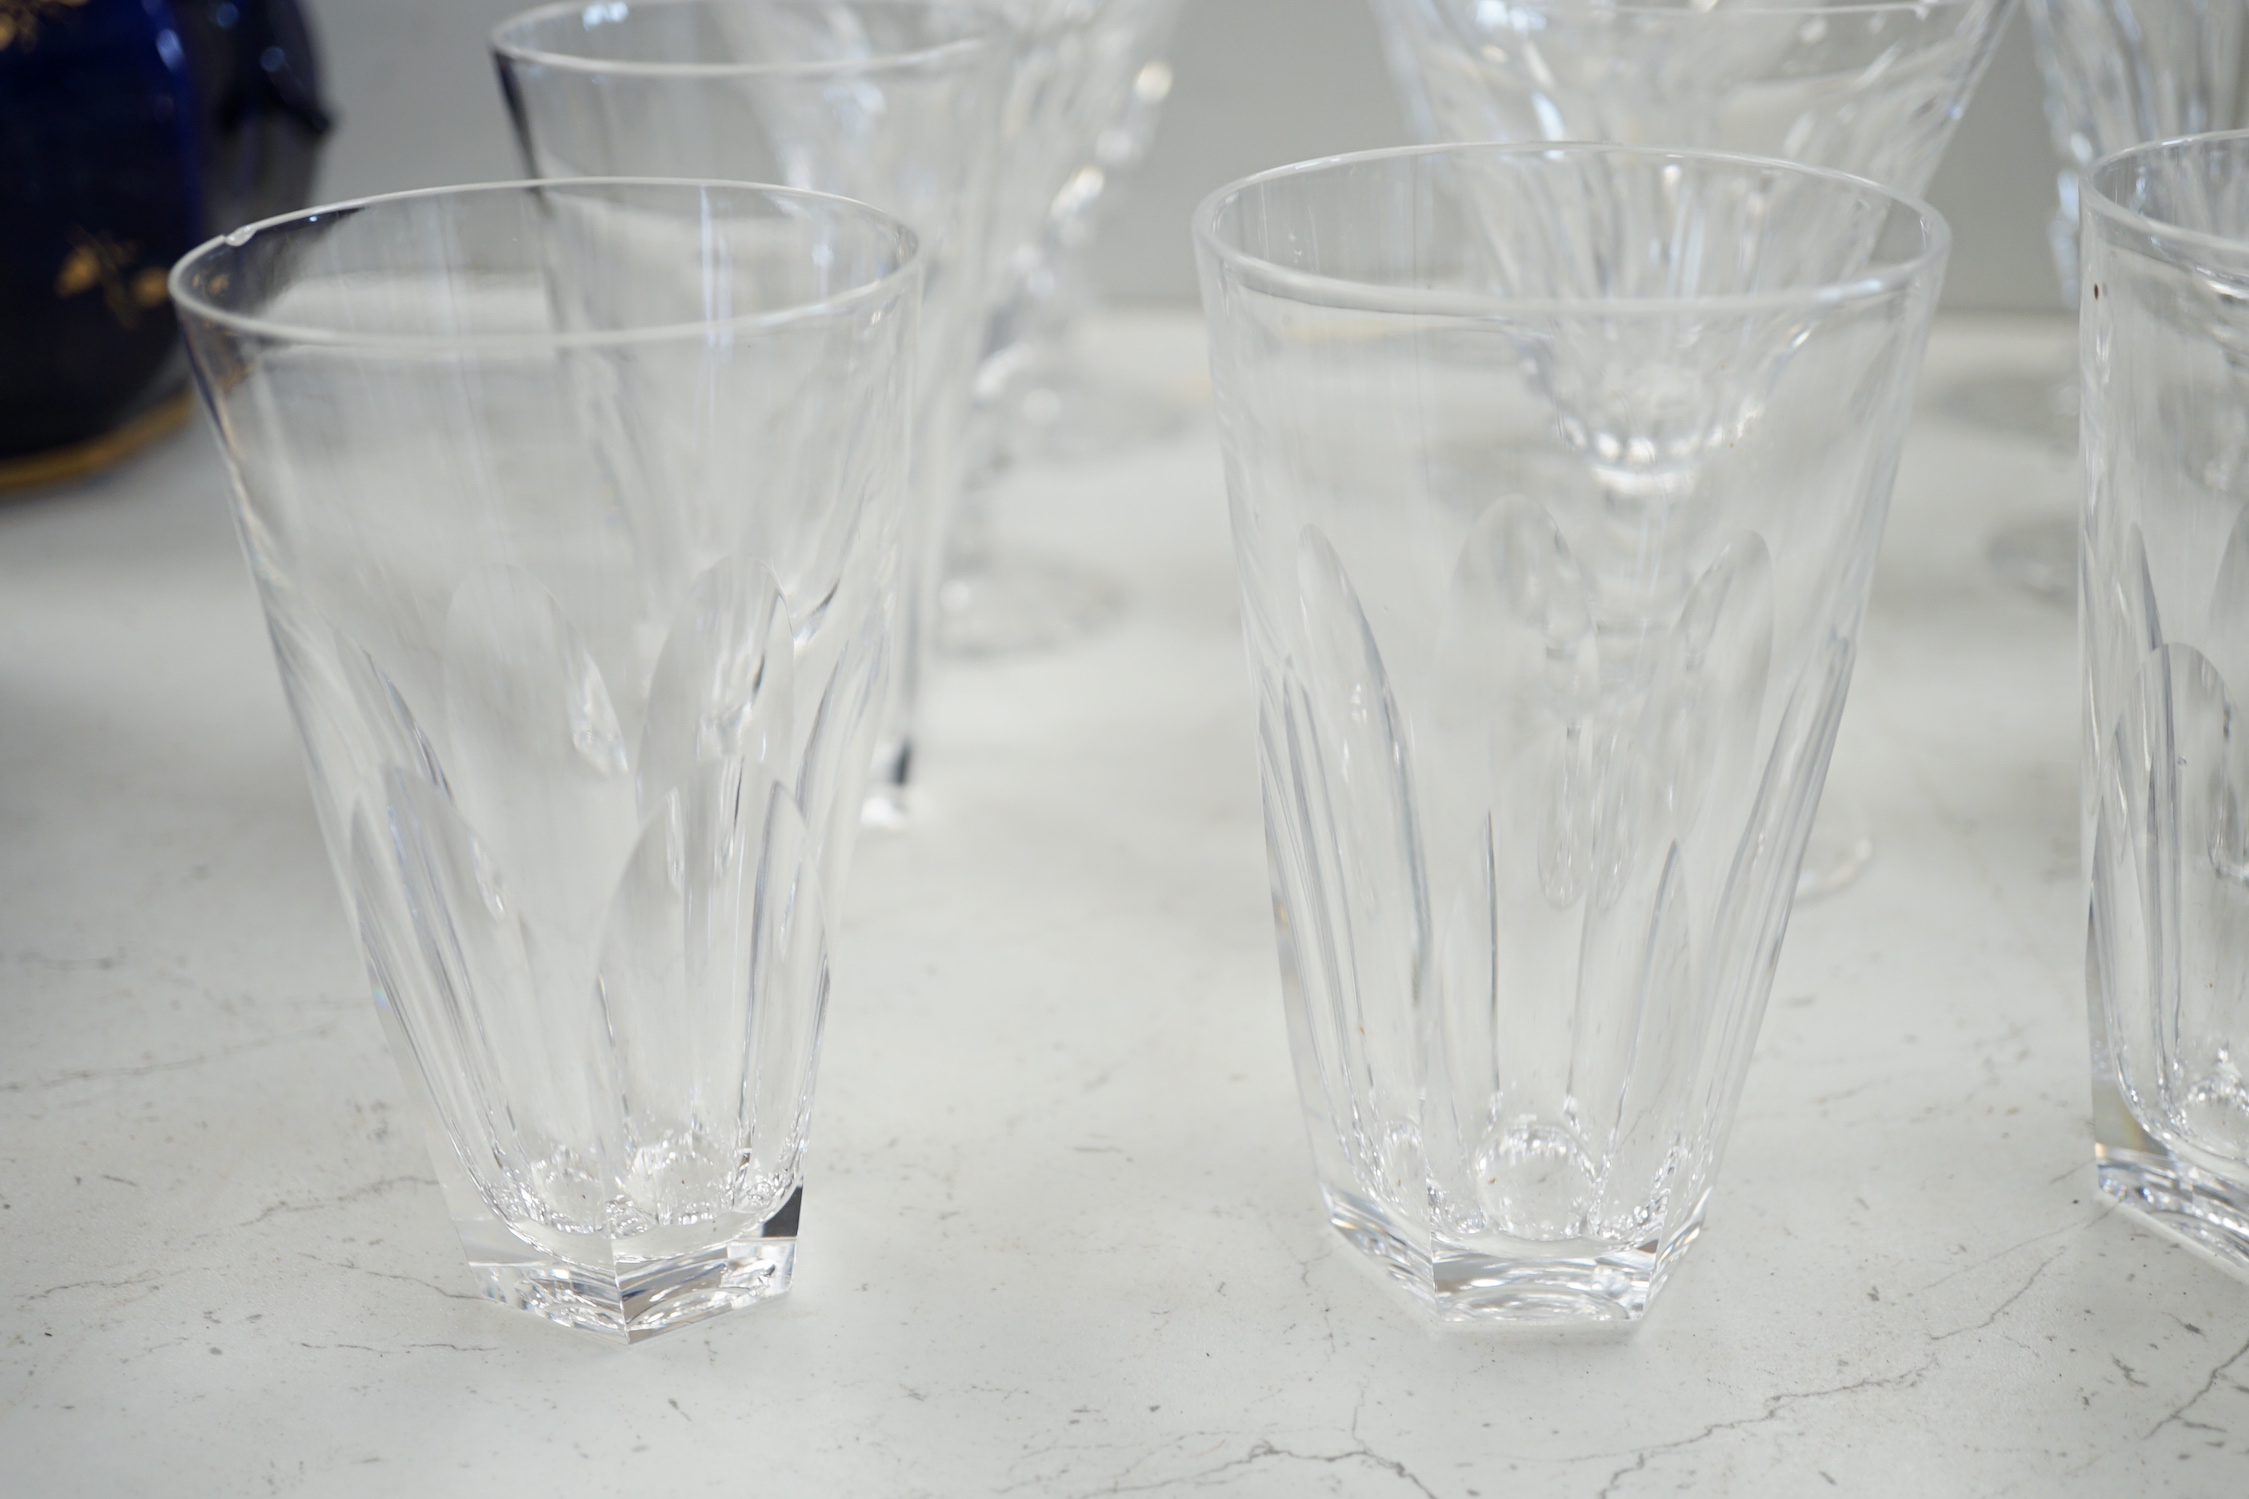 Waterford crystal. A set of seven wine glasses and five tumblers and another wine glass